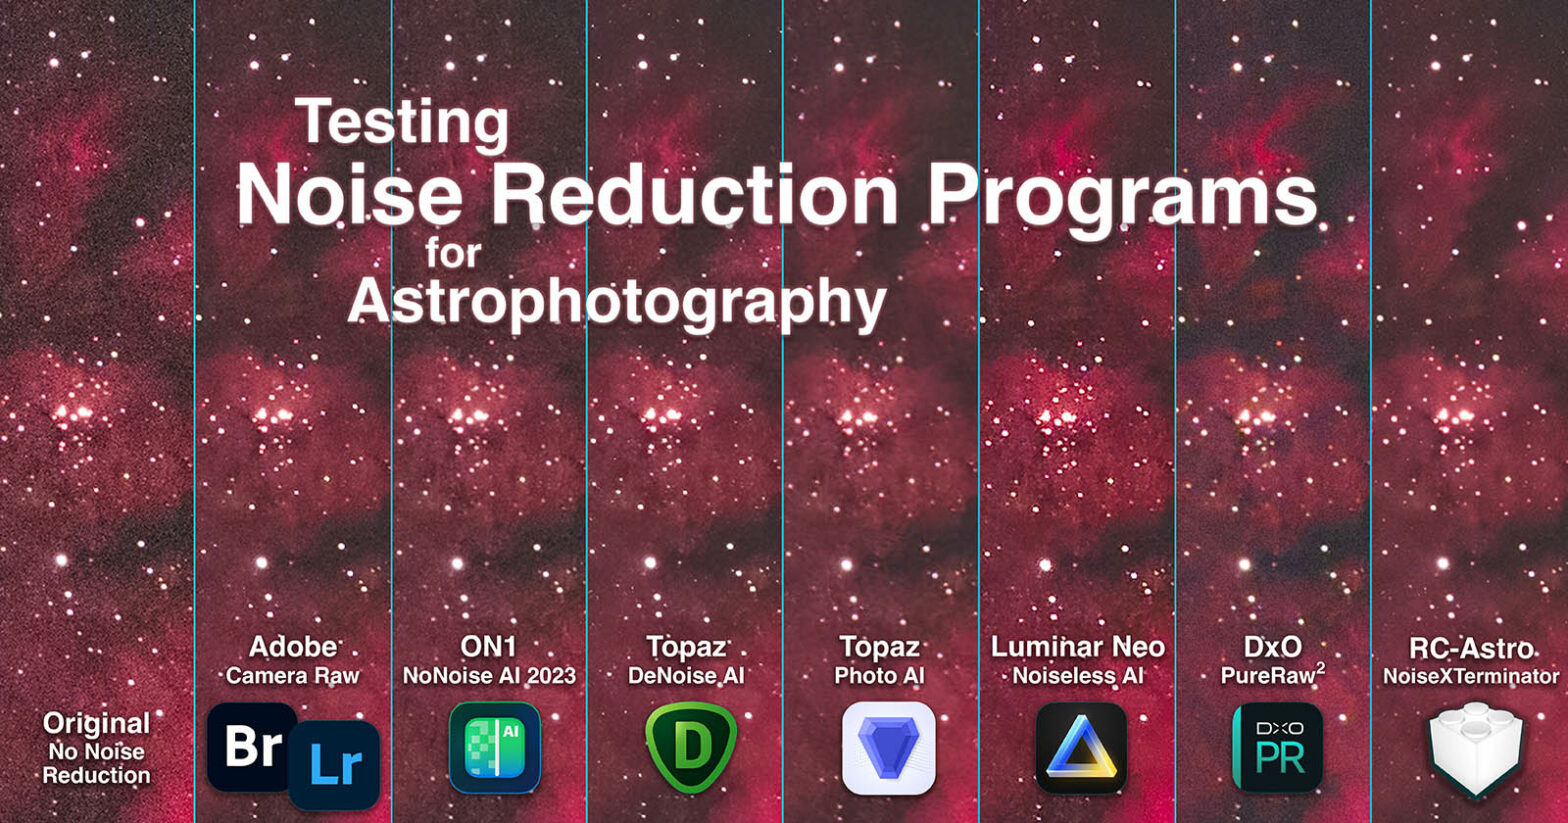 A Comparison of Noise Reduction Programs for Astrophotography